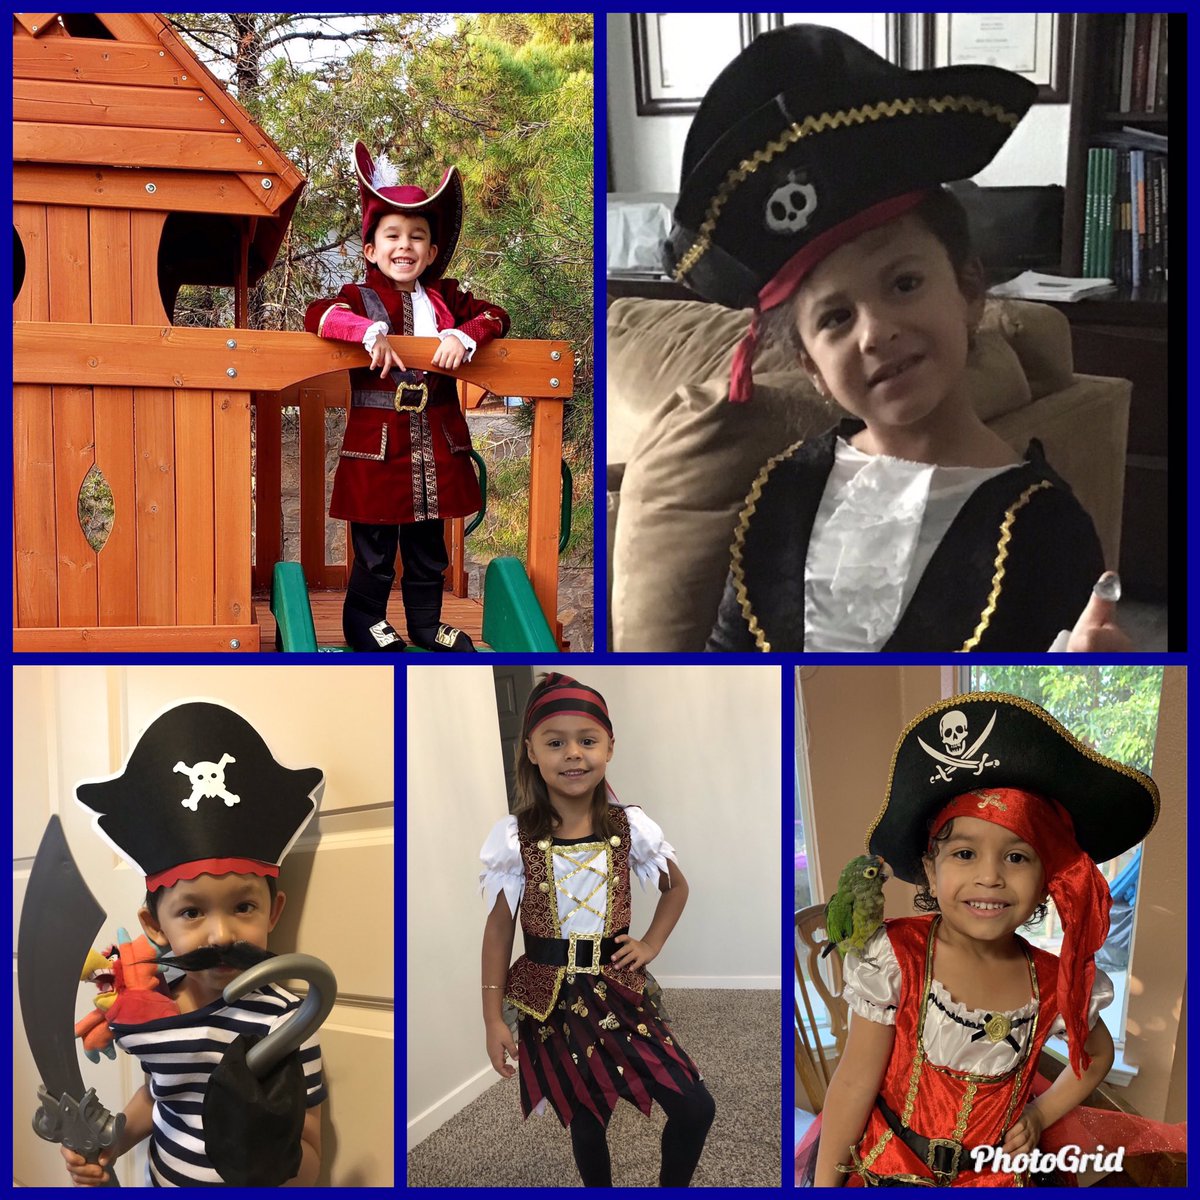 Our little Pirates go to dress up for #TalkLikeAPirateDay. What a fun way to end another week of learning. #DualLanguageAcademy #TeamSISD @MCooper_ES @MGarcia_MCE